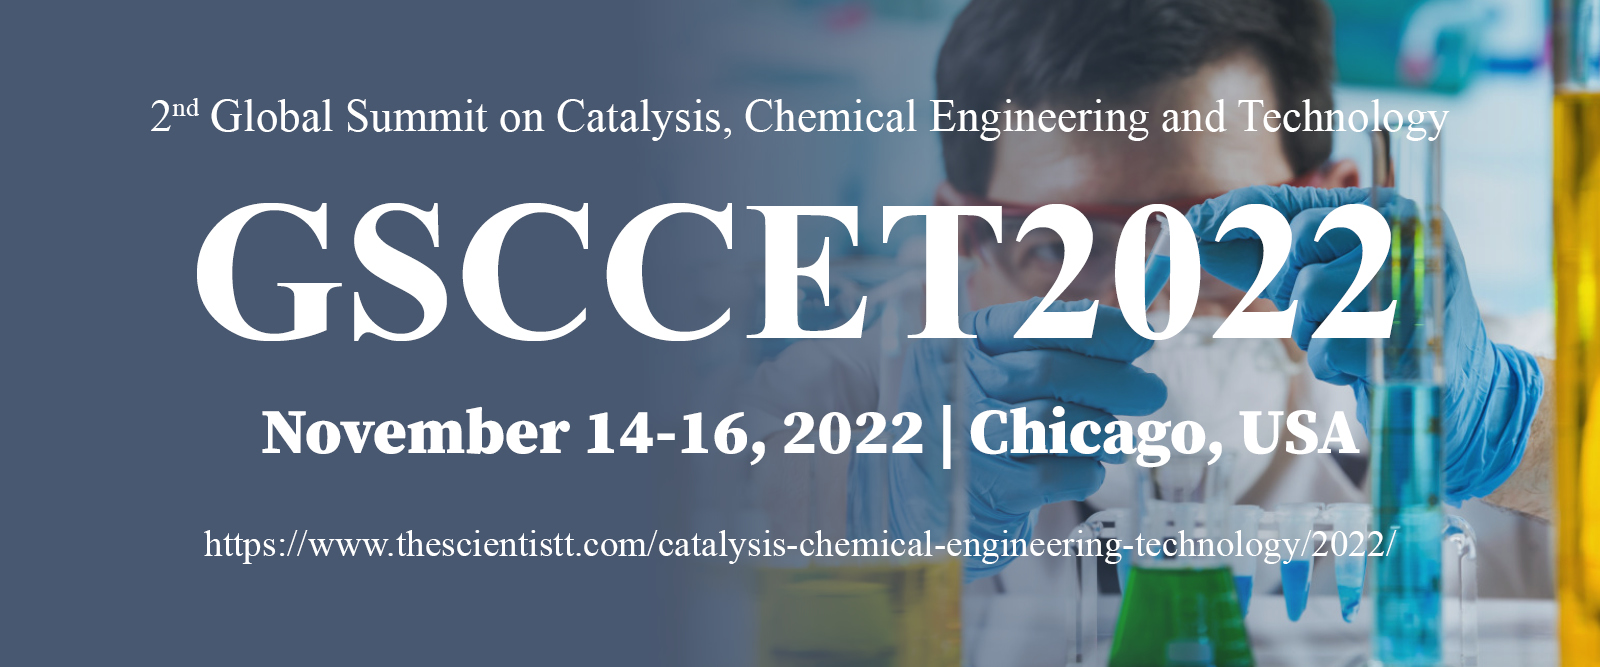 2nd Global Summit on Catalysis, Chemical Engineering and Technology